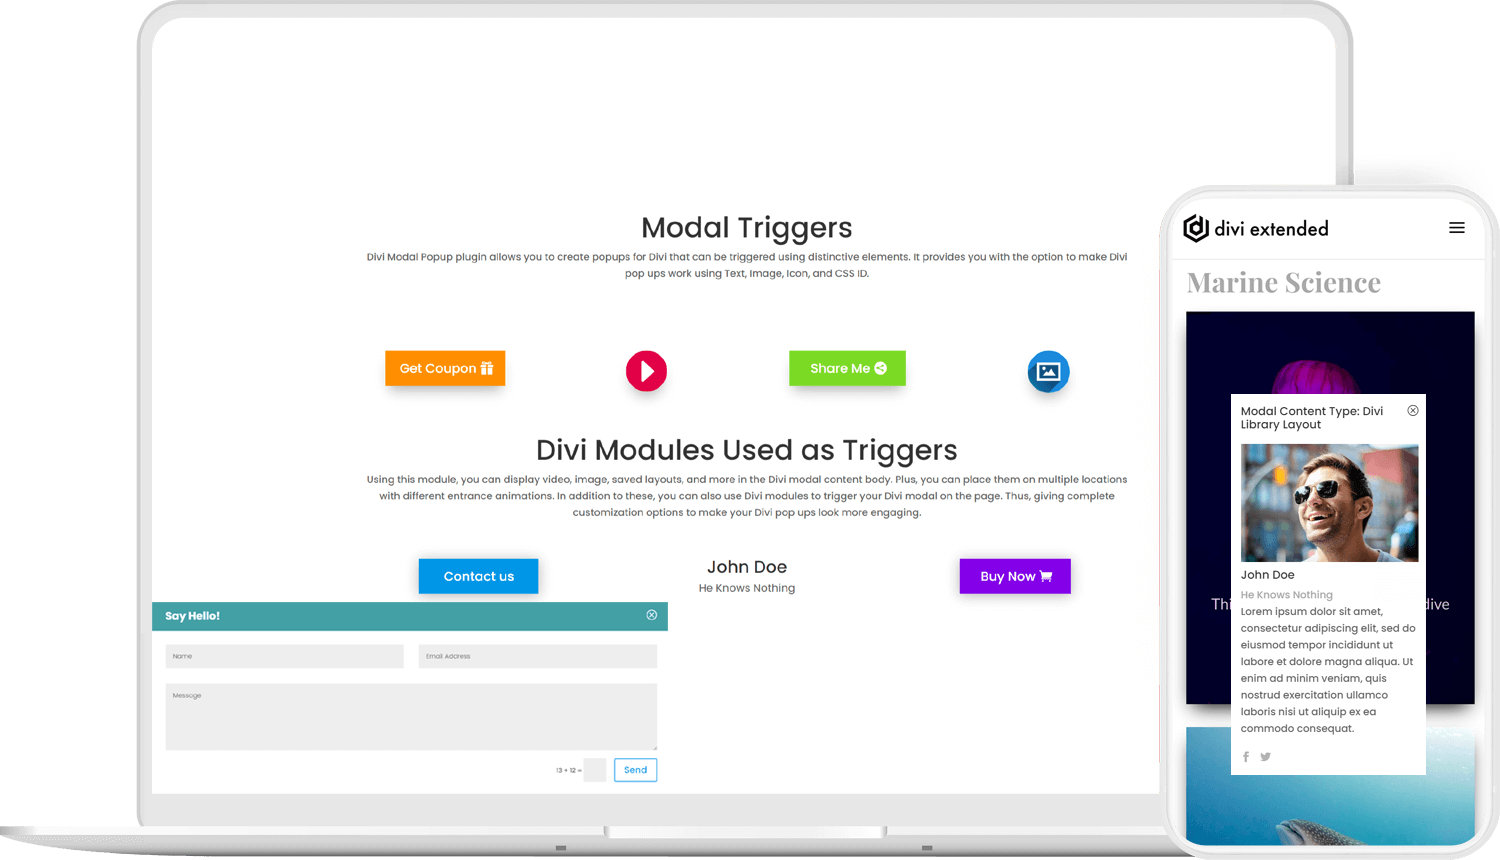 Divi Blog Extras is a popular Divi category layout plugin